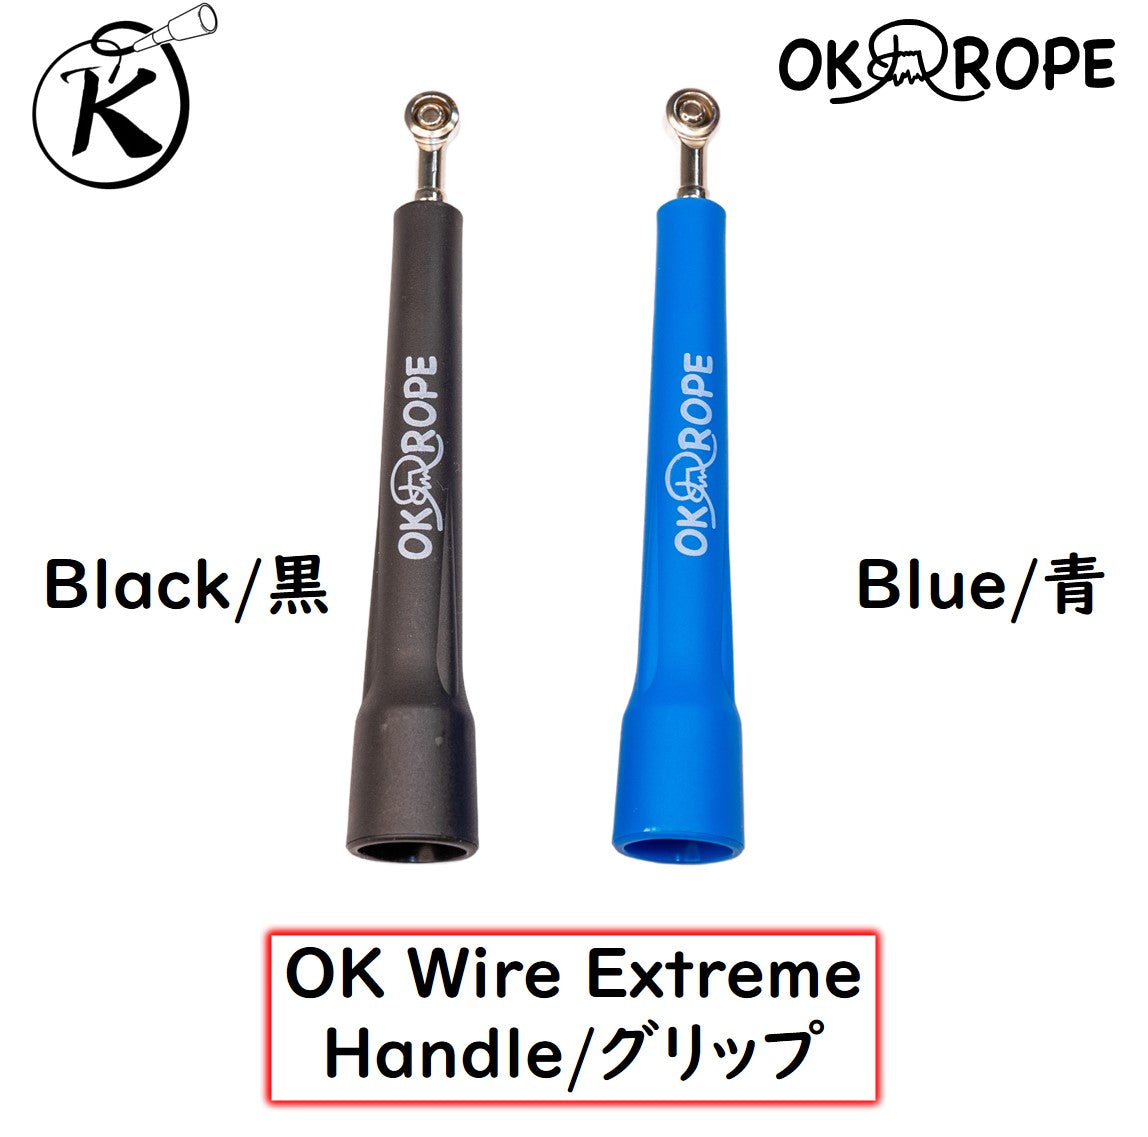 OK Wire Extreme -Speed Wire Rope- Handle Only (Single Handle)